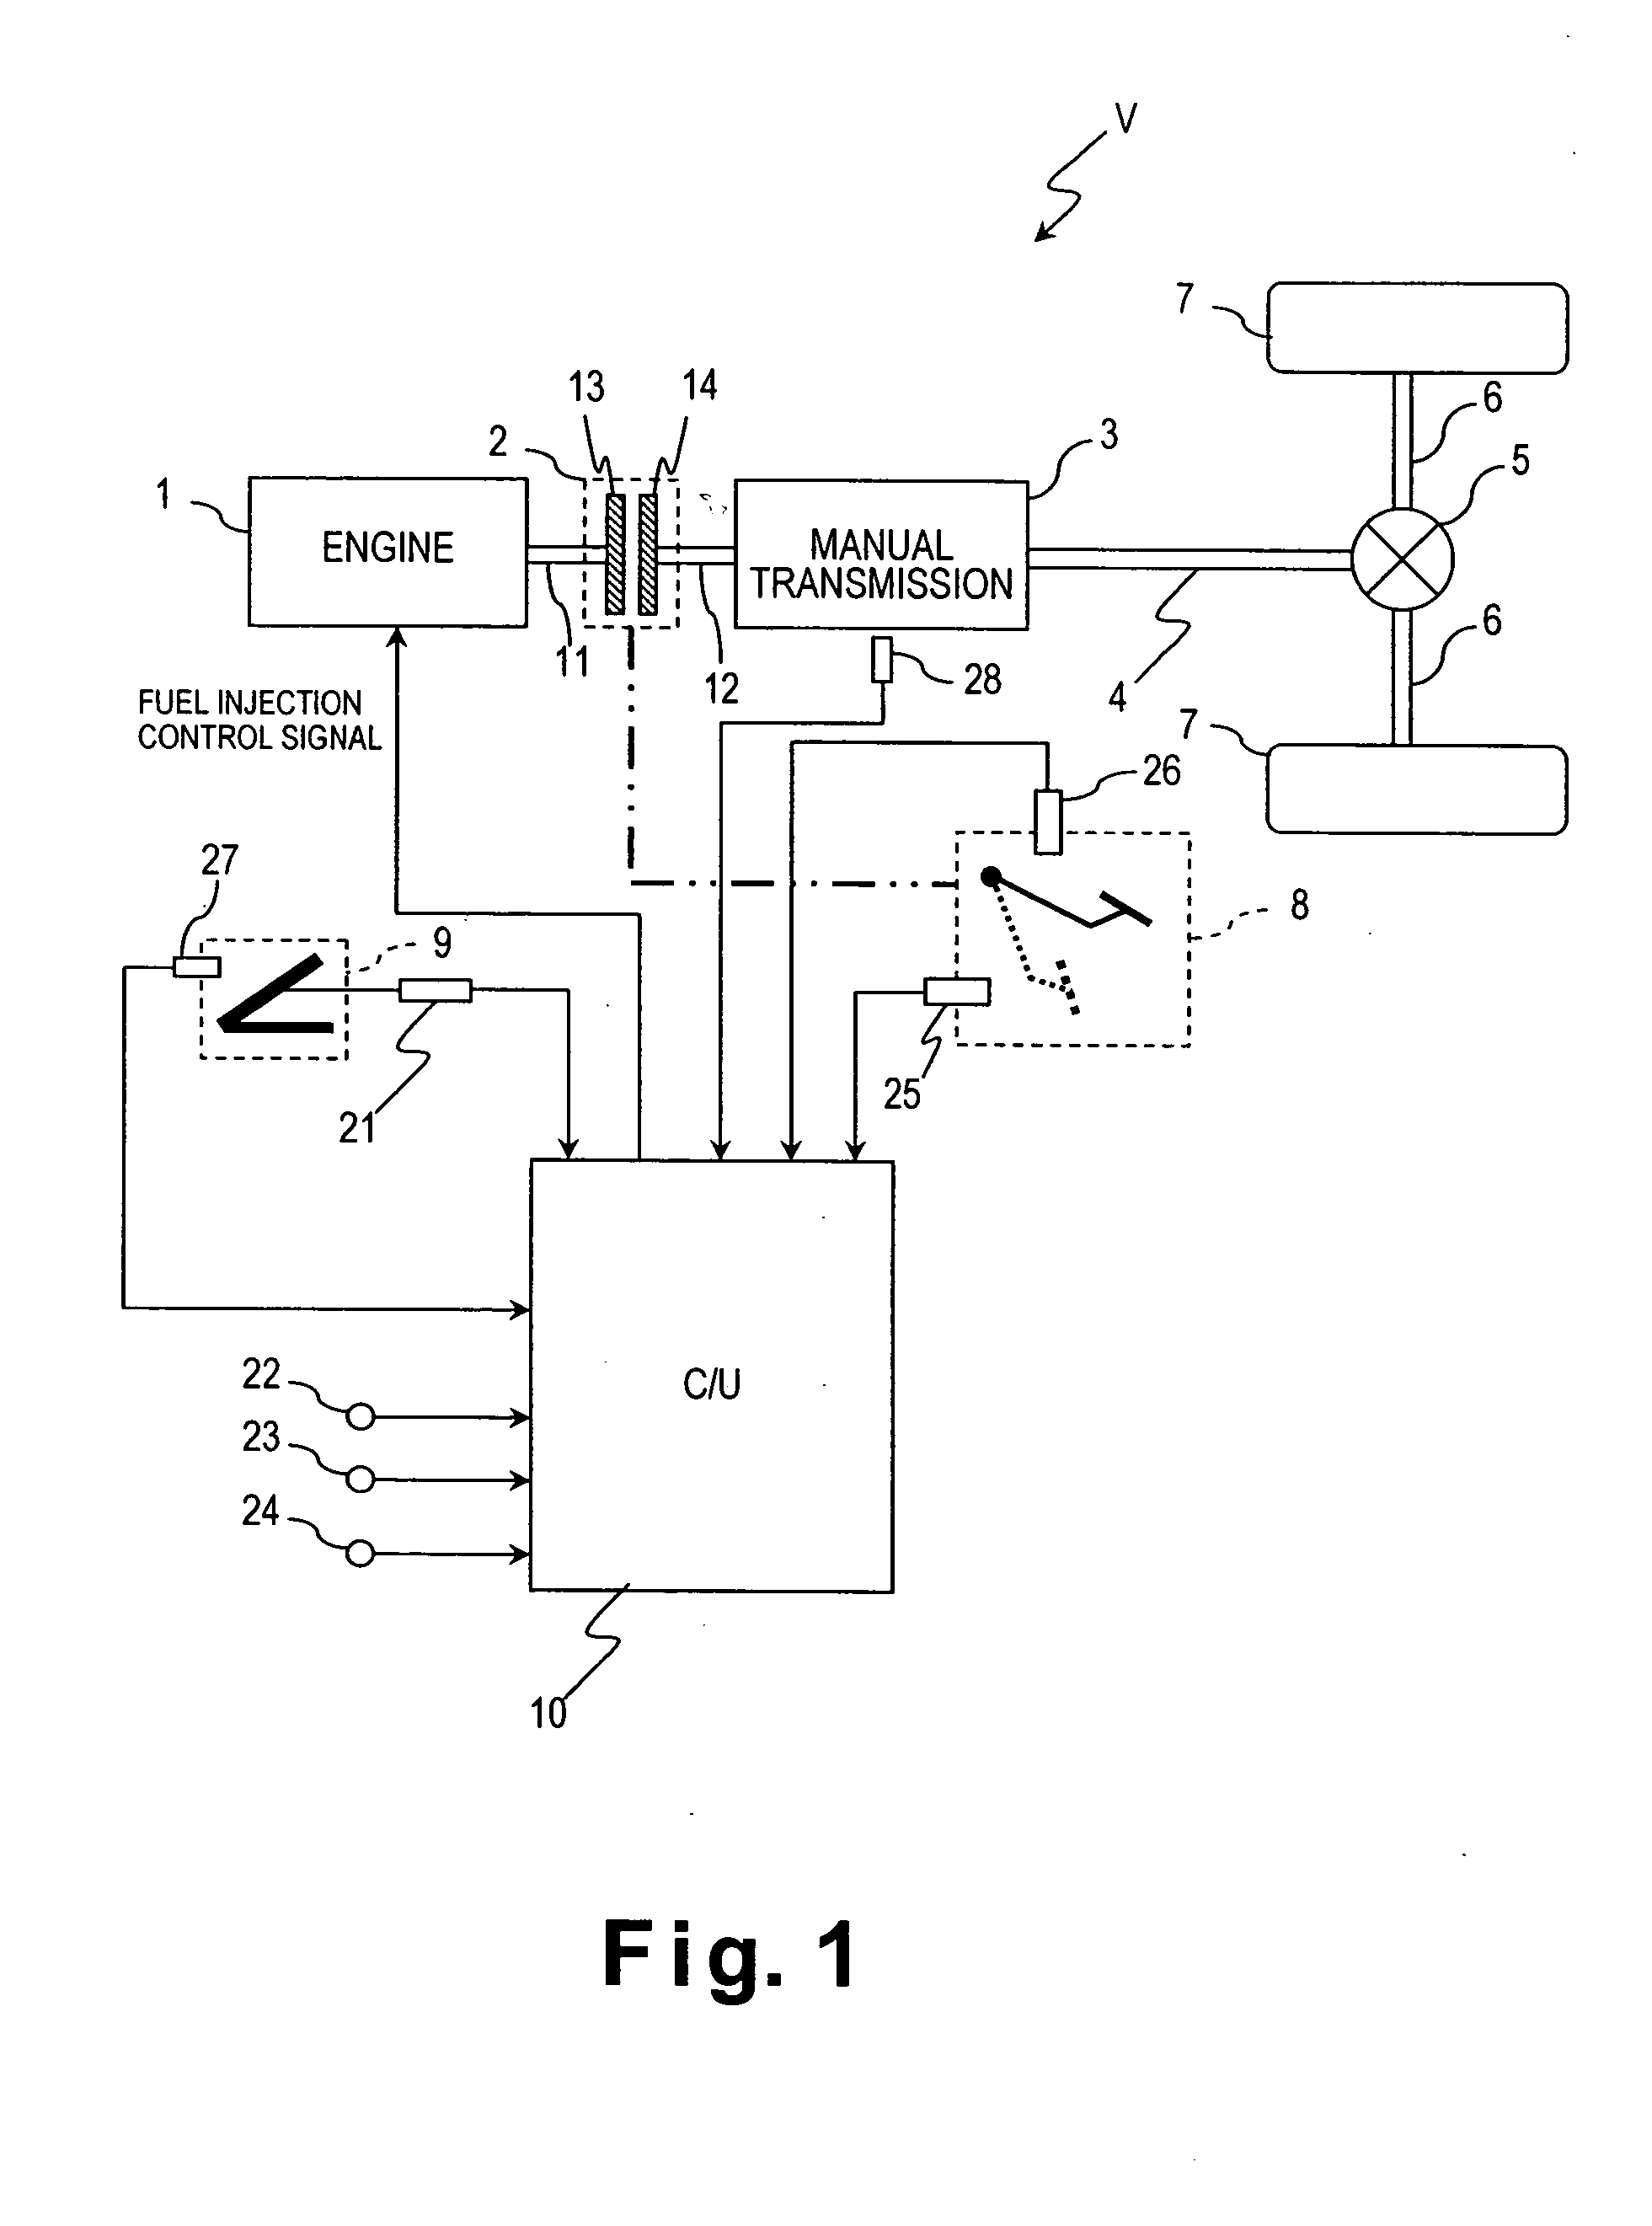 Engine fuel supply control device